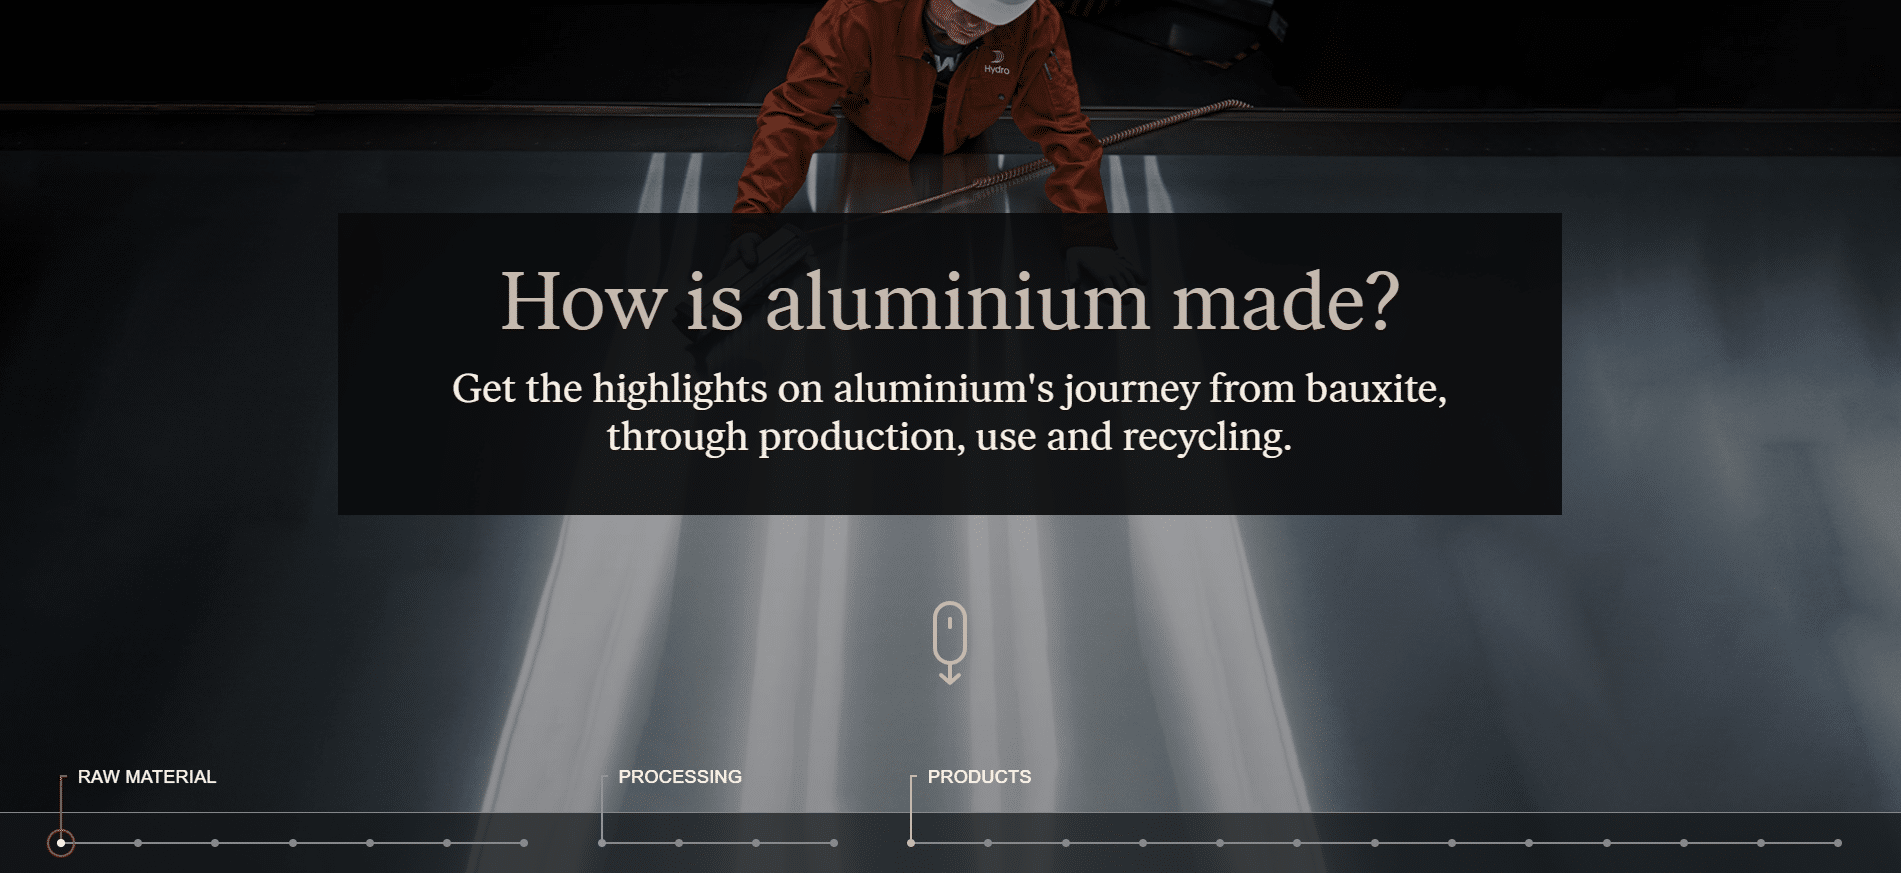 the aluminum manufacturing process, from ore to production, use and recycling